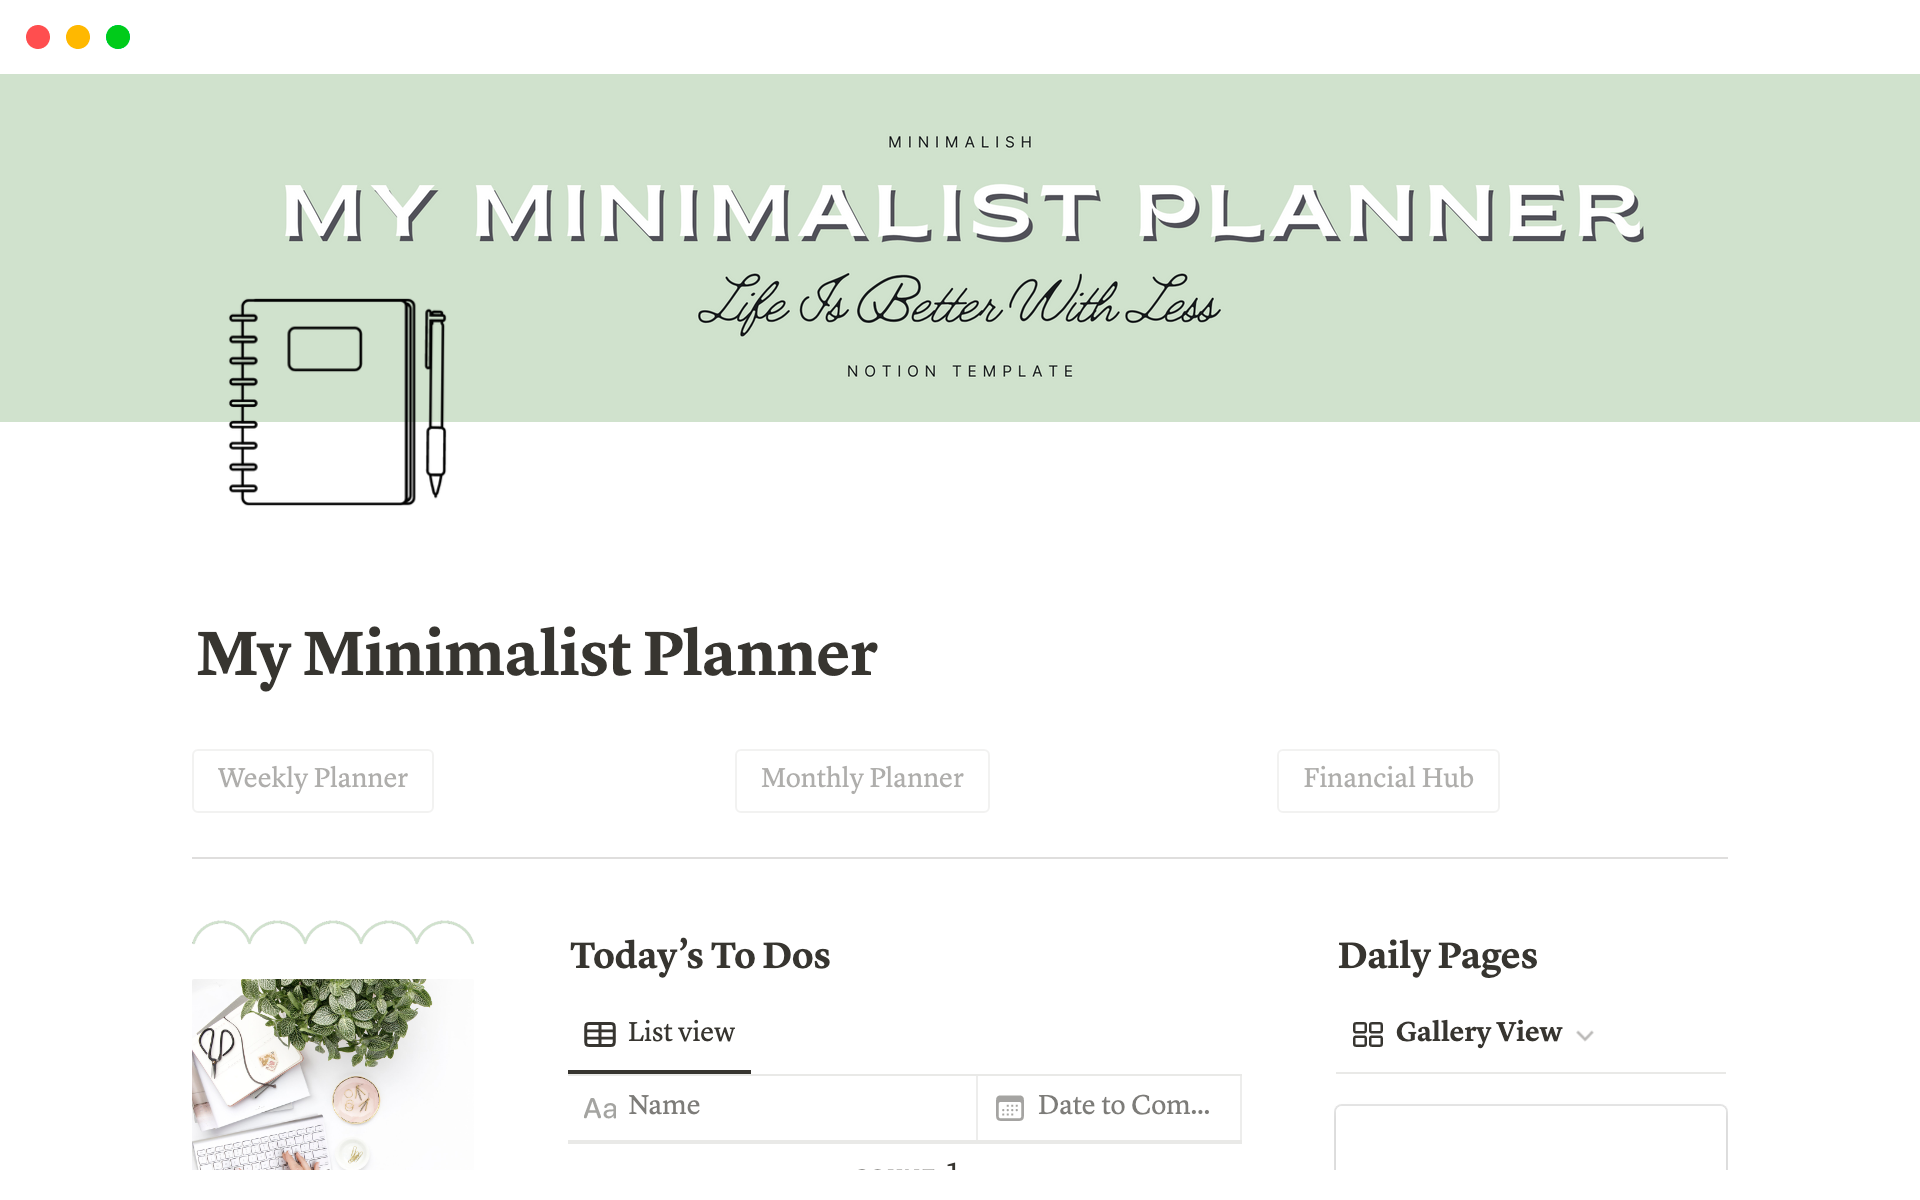 Minimalist Planner is a simplified Notion Template including essential hubs to organize your life.